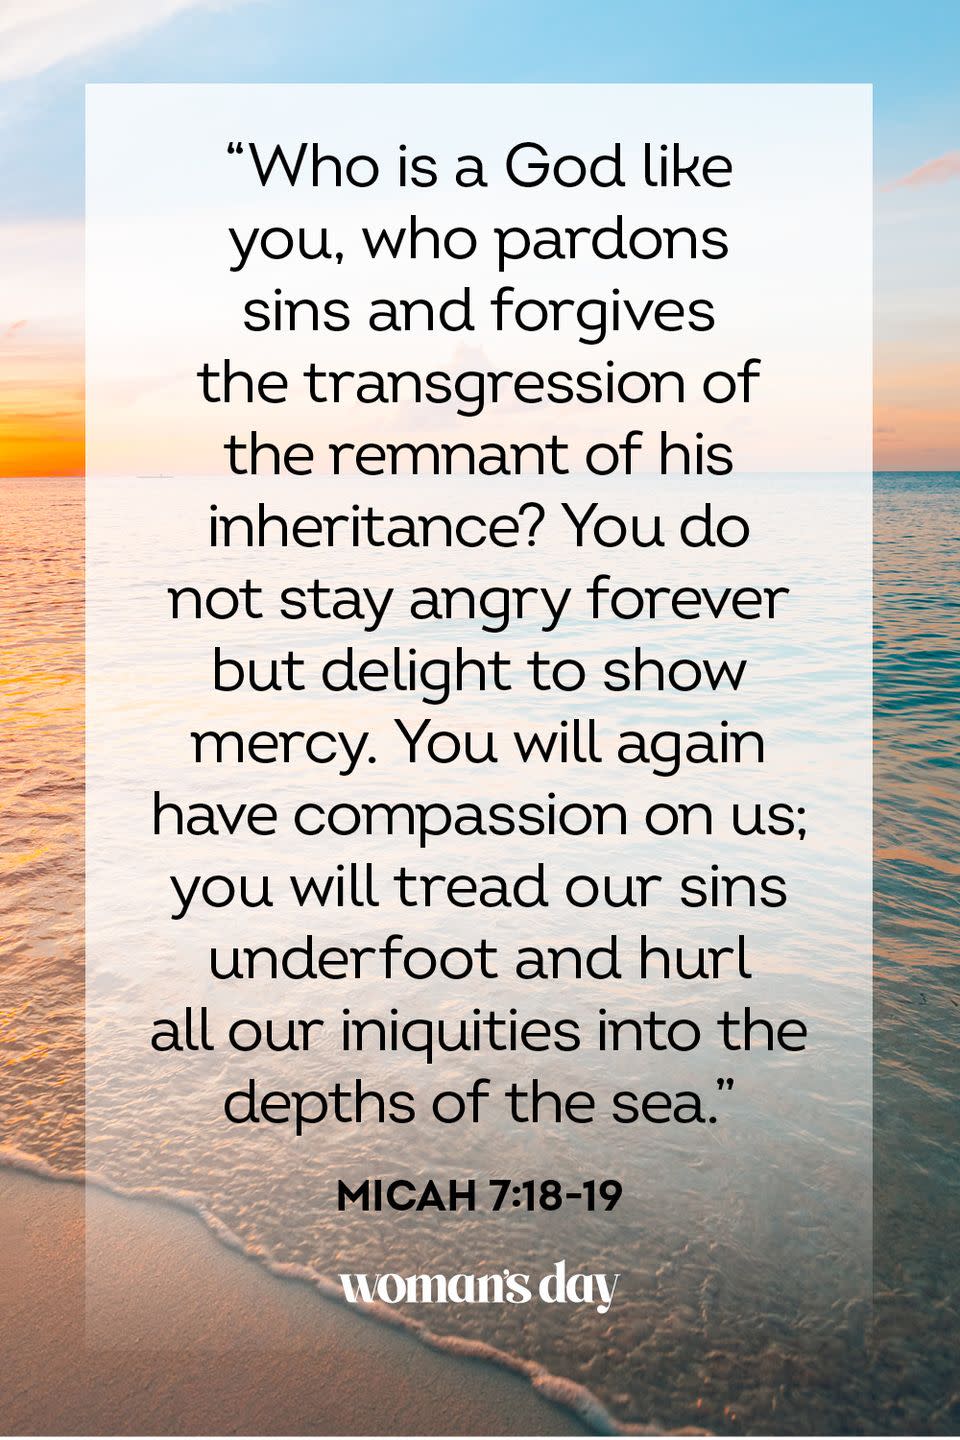 Learn to Forgive (and Maybe Forget) With These 17 Bible Verses